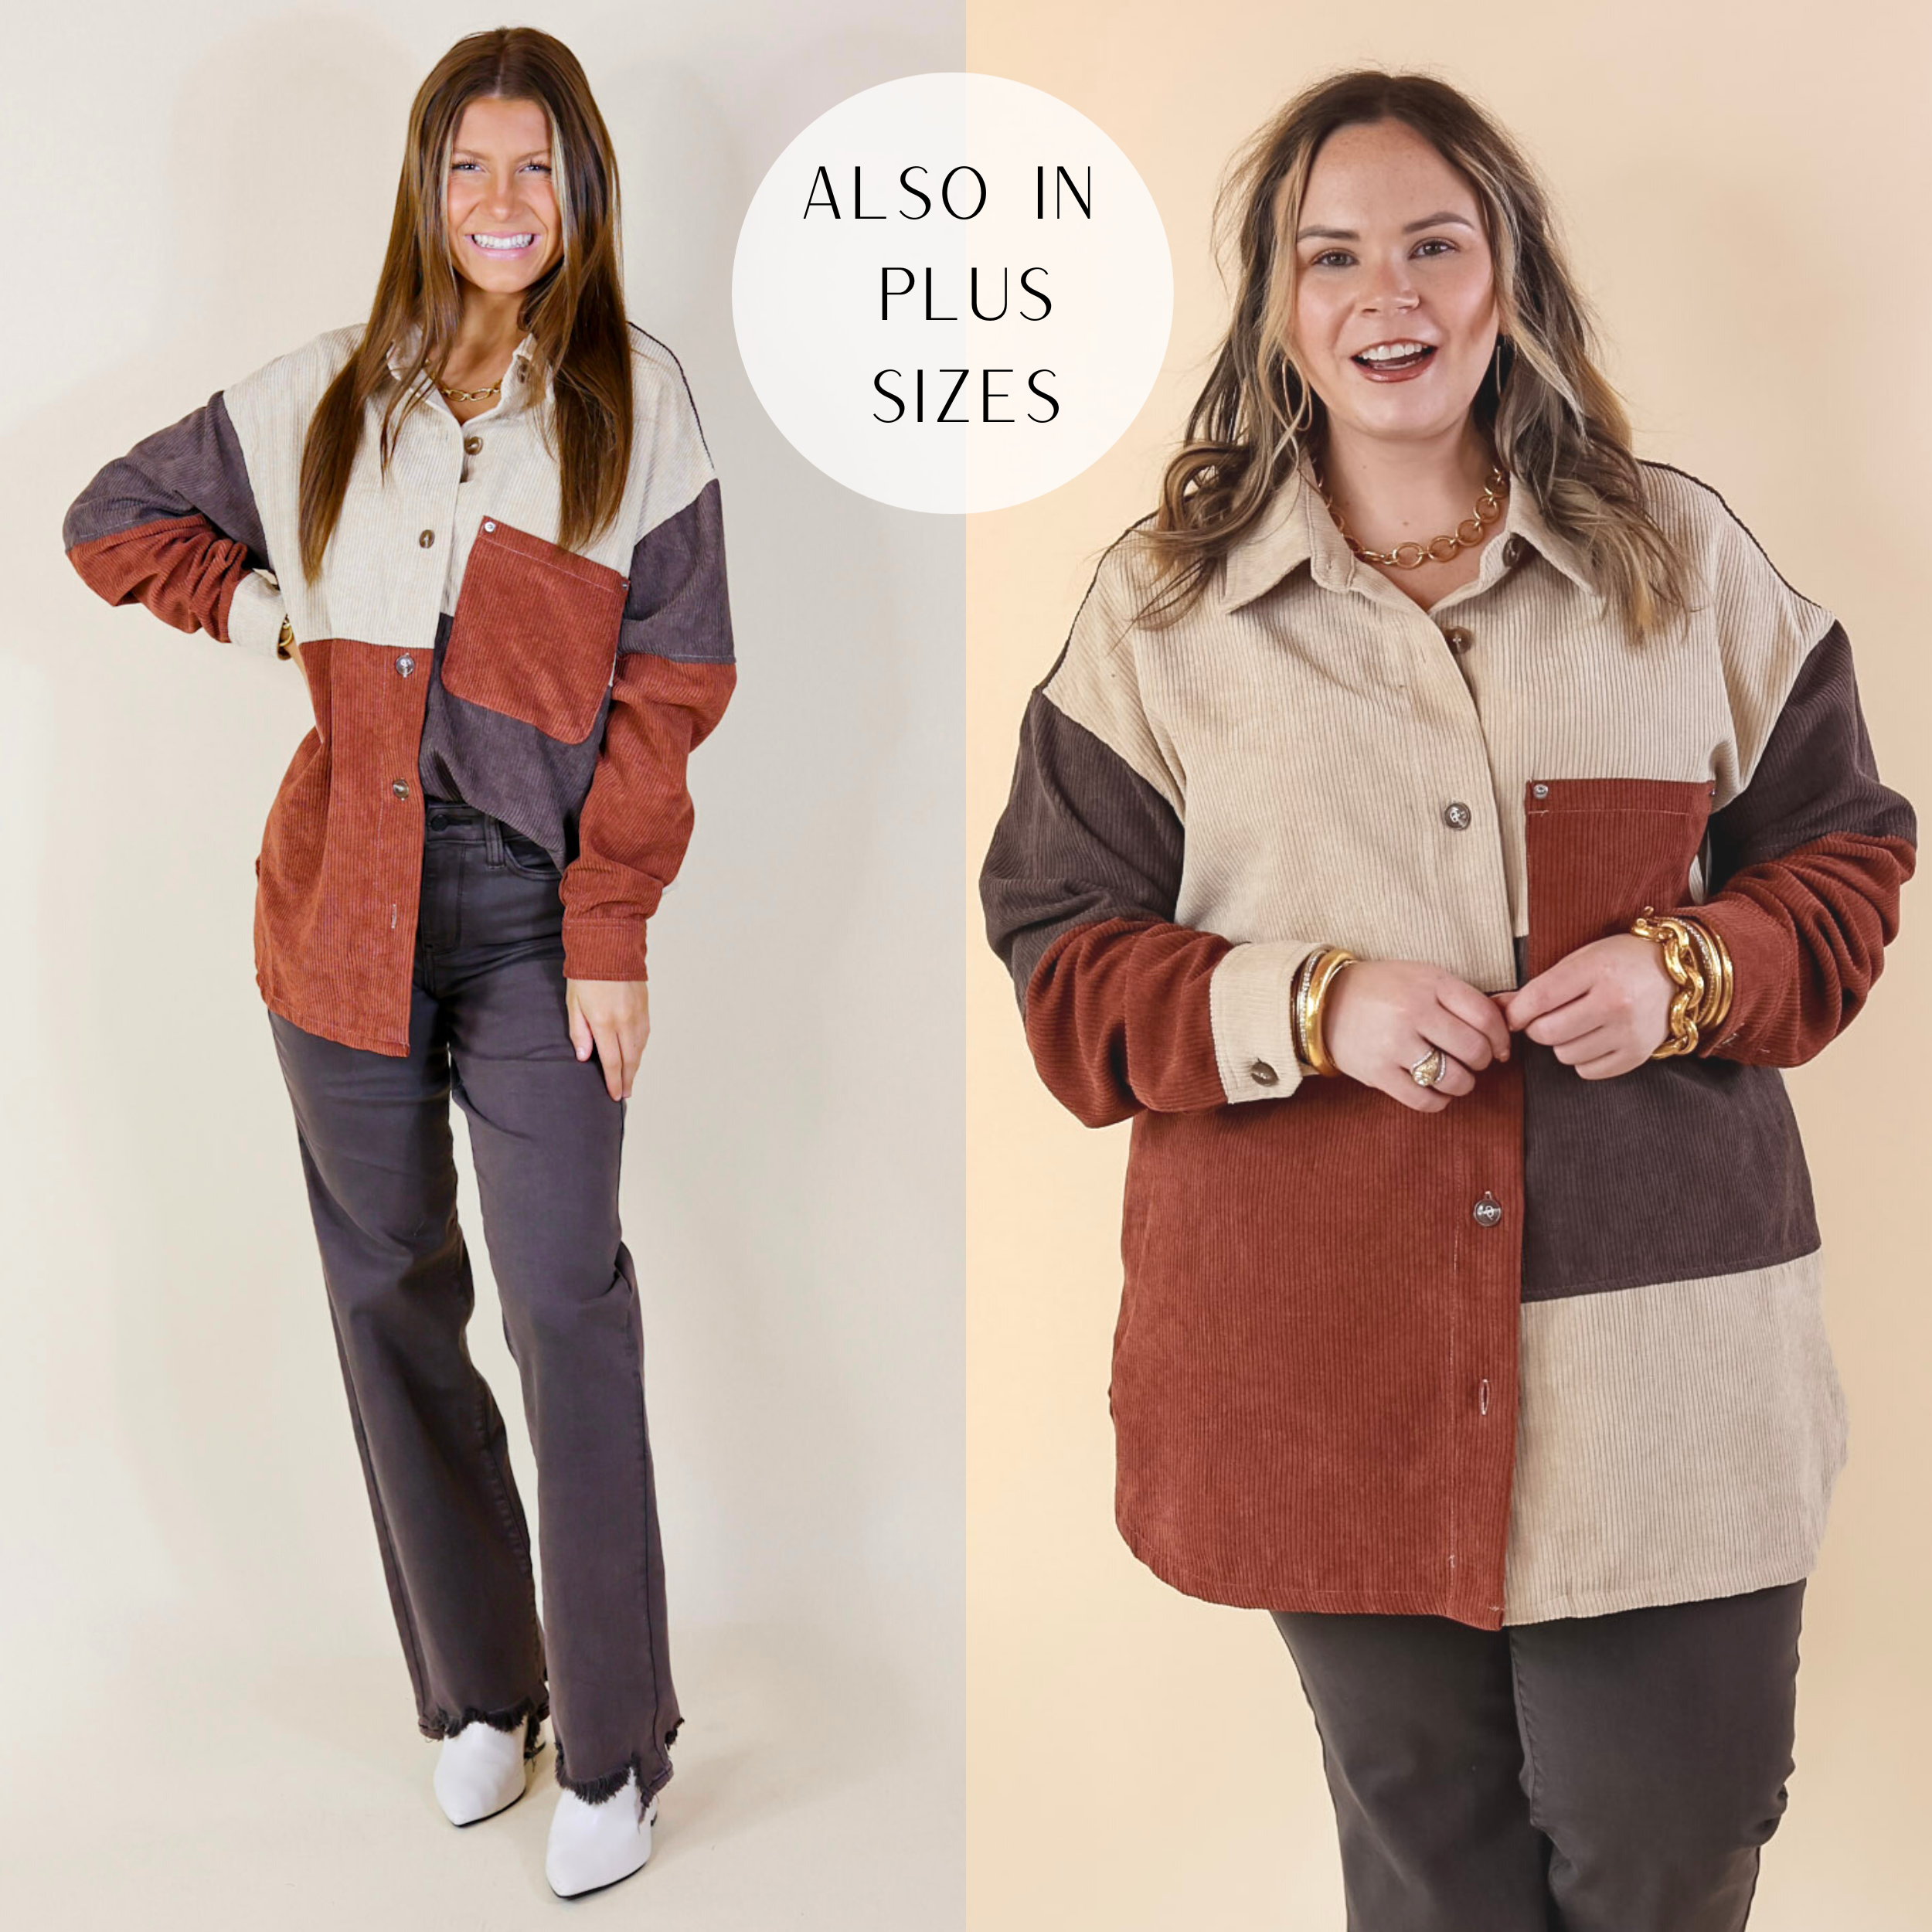 Casual Cuddles Color Block Corduroy Shacket in Brown Mix